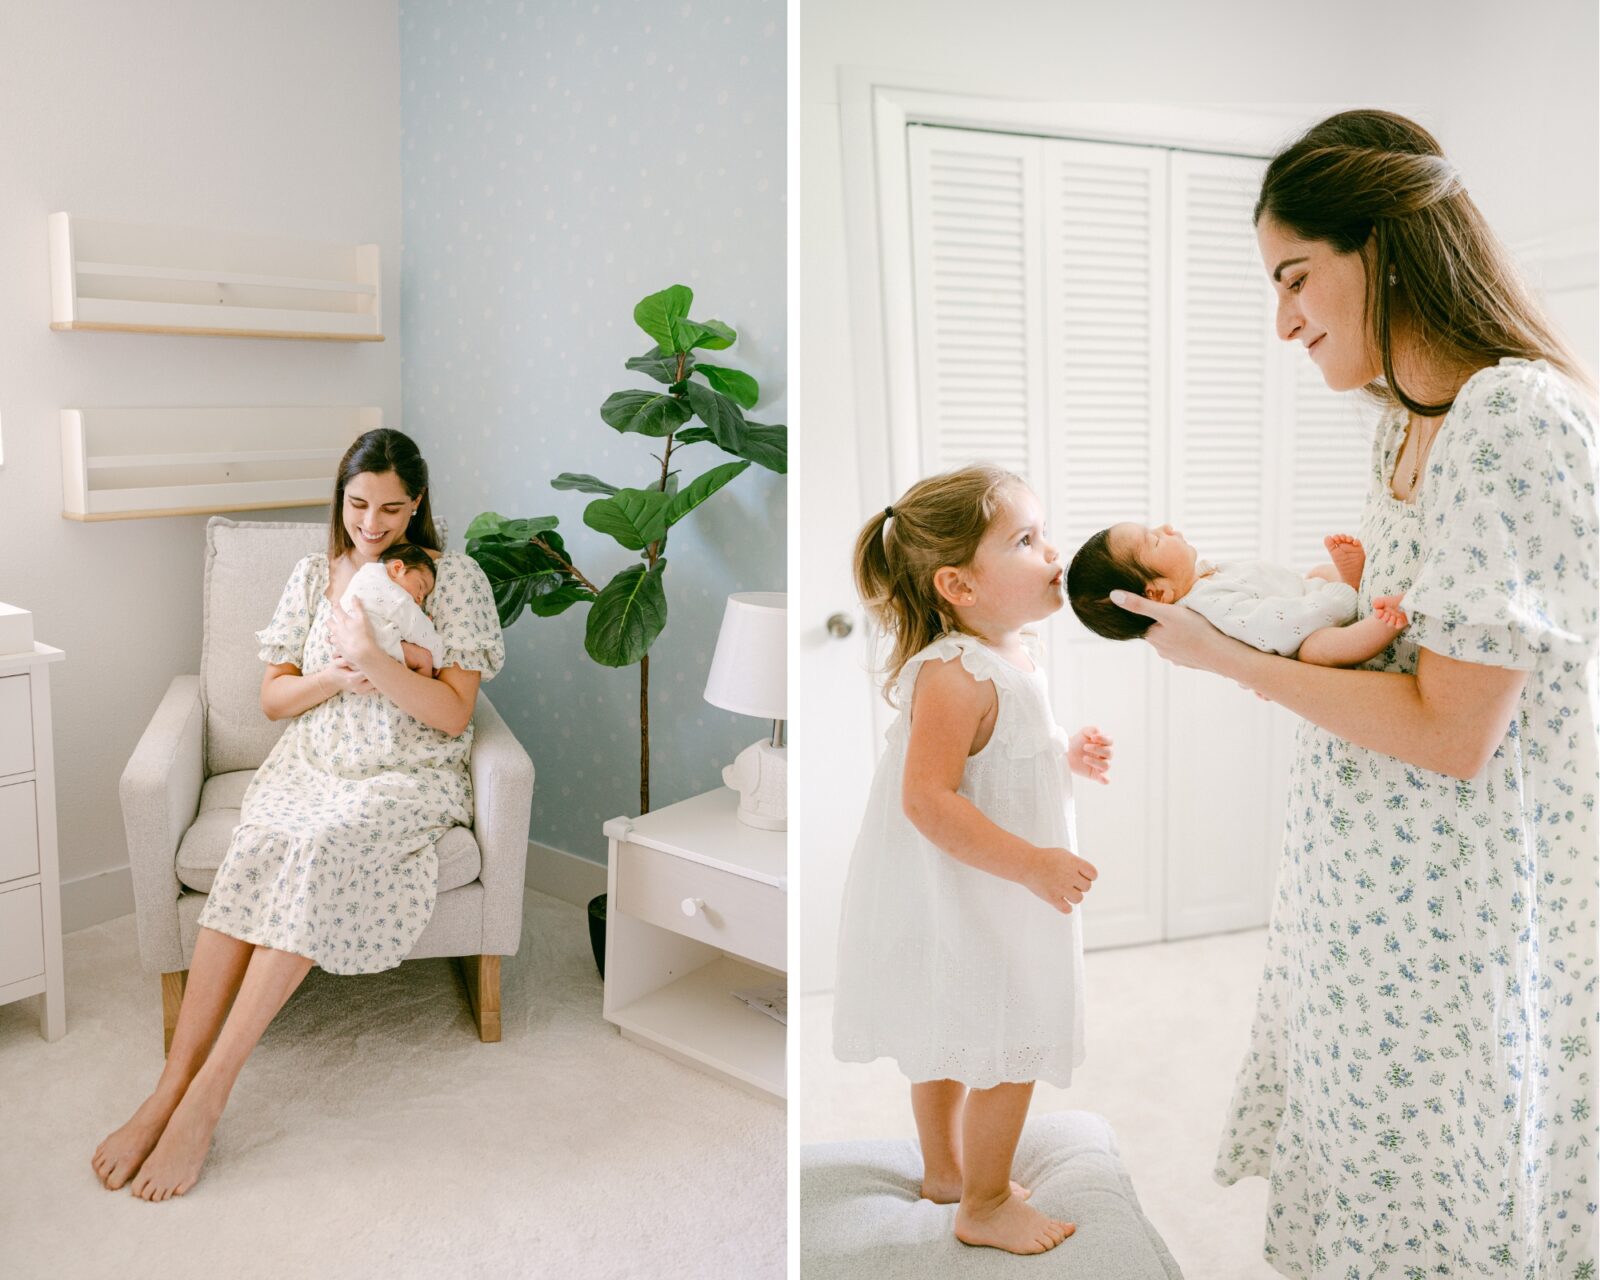 What to expect during your Miami Newborn Photoshoot